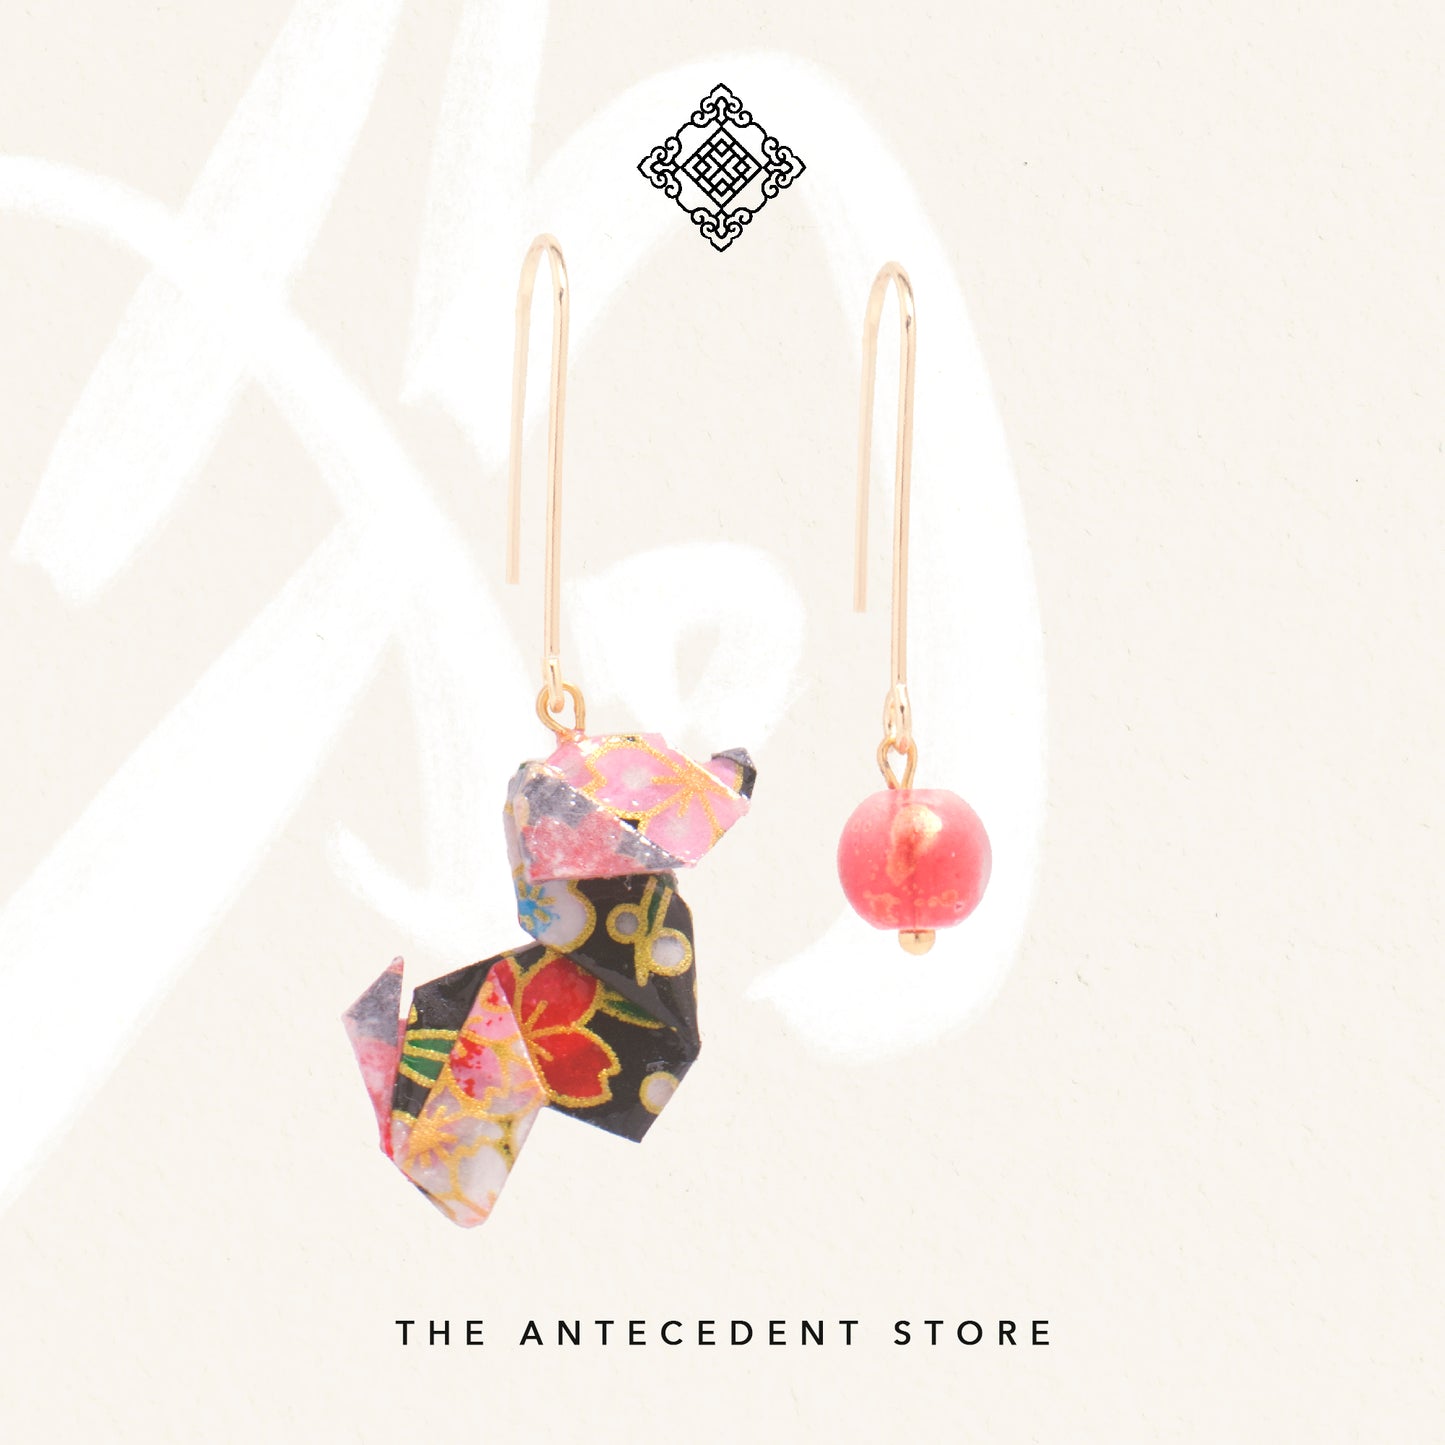 The Antecedent Store X Boss & Olly - Origami Dog Collection